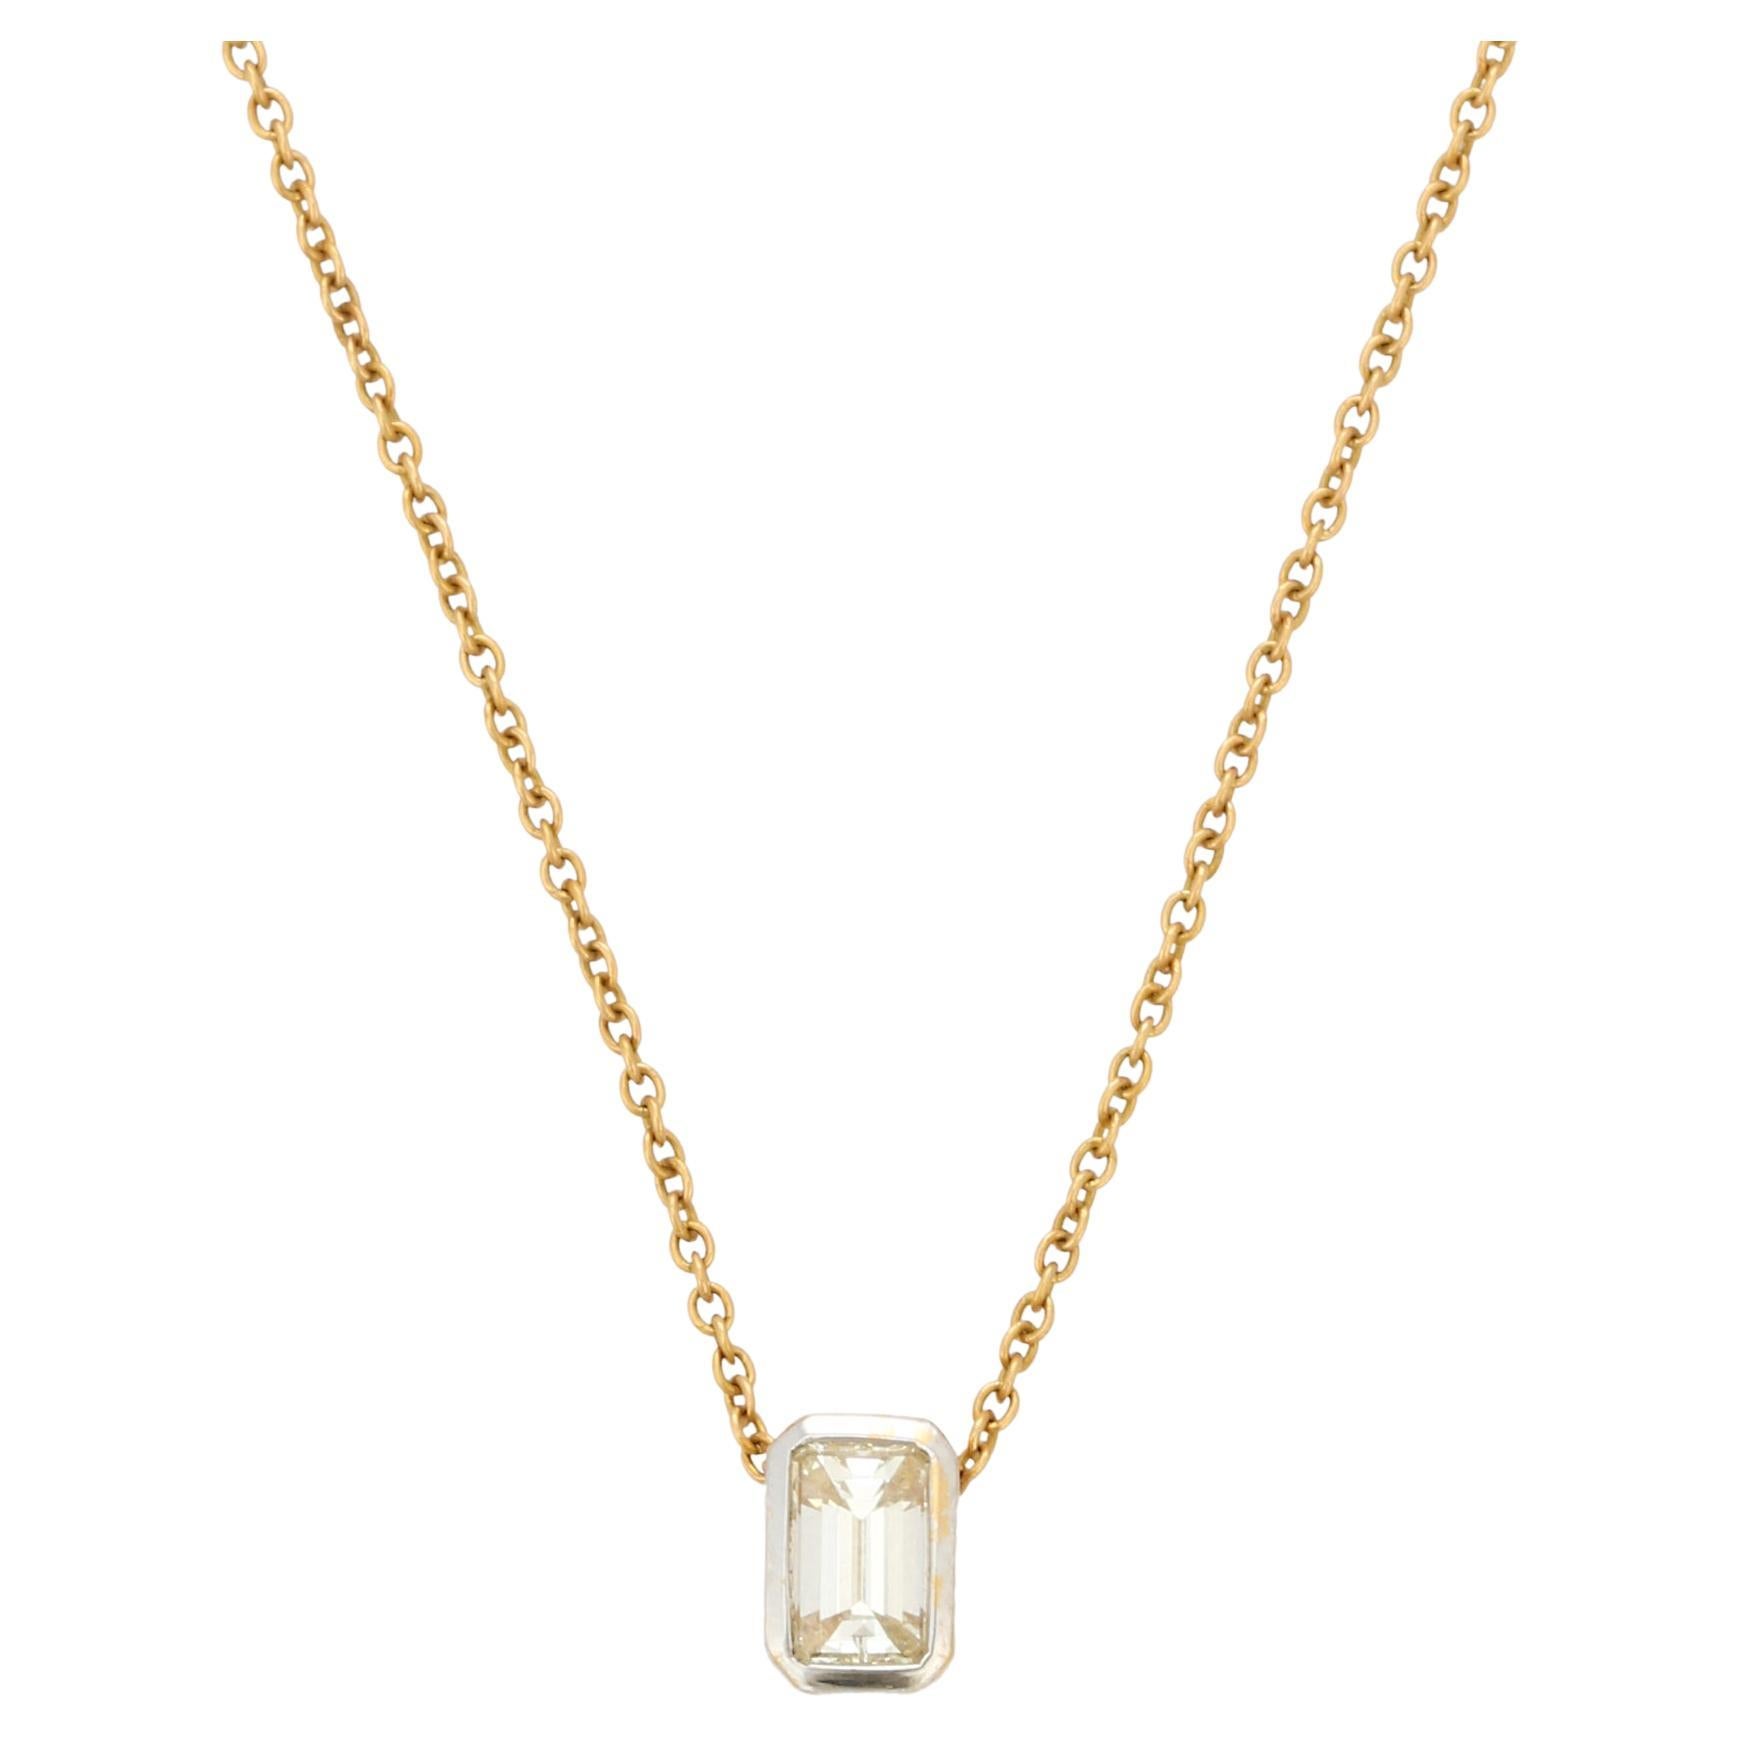 Octagon Cut Diamond Pendant Chain Necklace in 18K Yellow Gold  For Sale